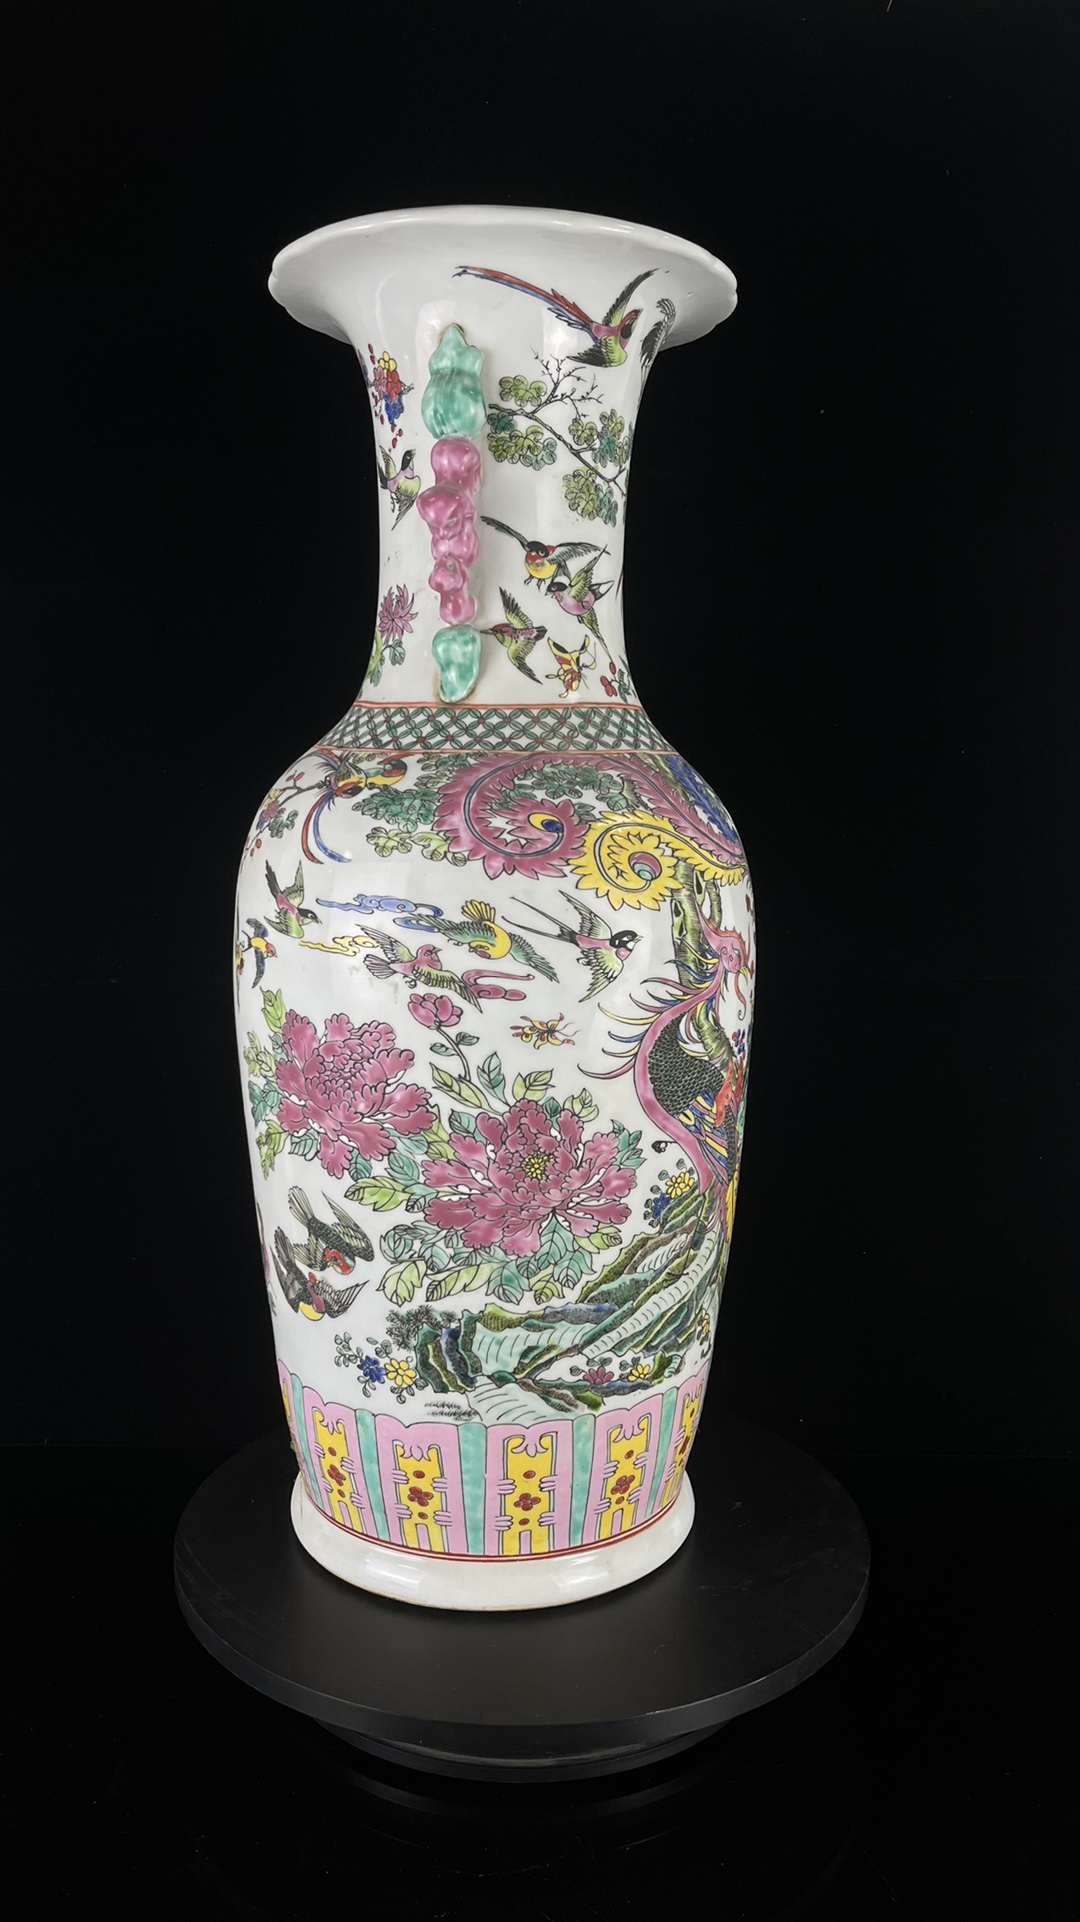 Large flower and bird vase made in the Kangxi period of the Qing Dynasty - Image 6 of 9